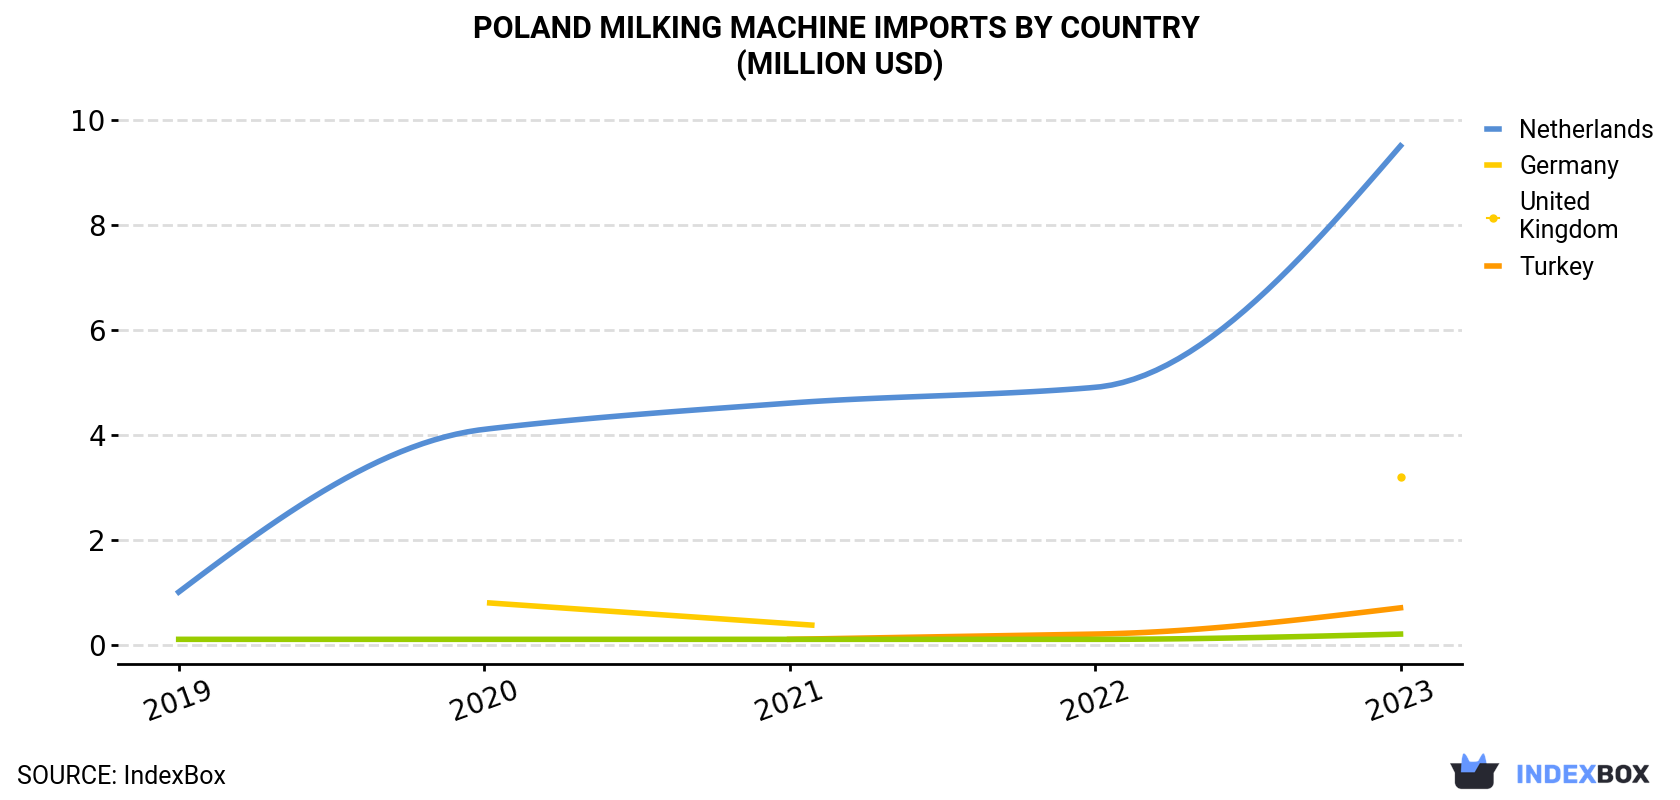 Poland Milking Machine Imports By Country (Million USD)